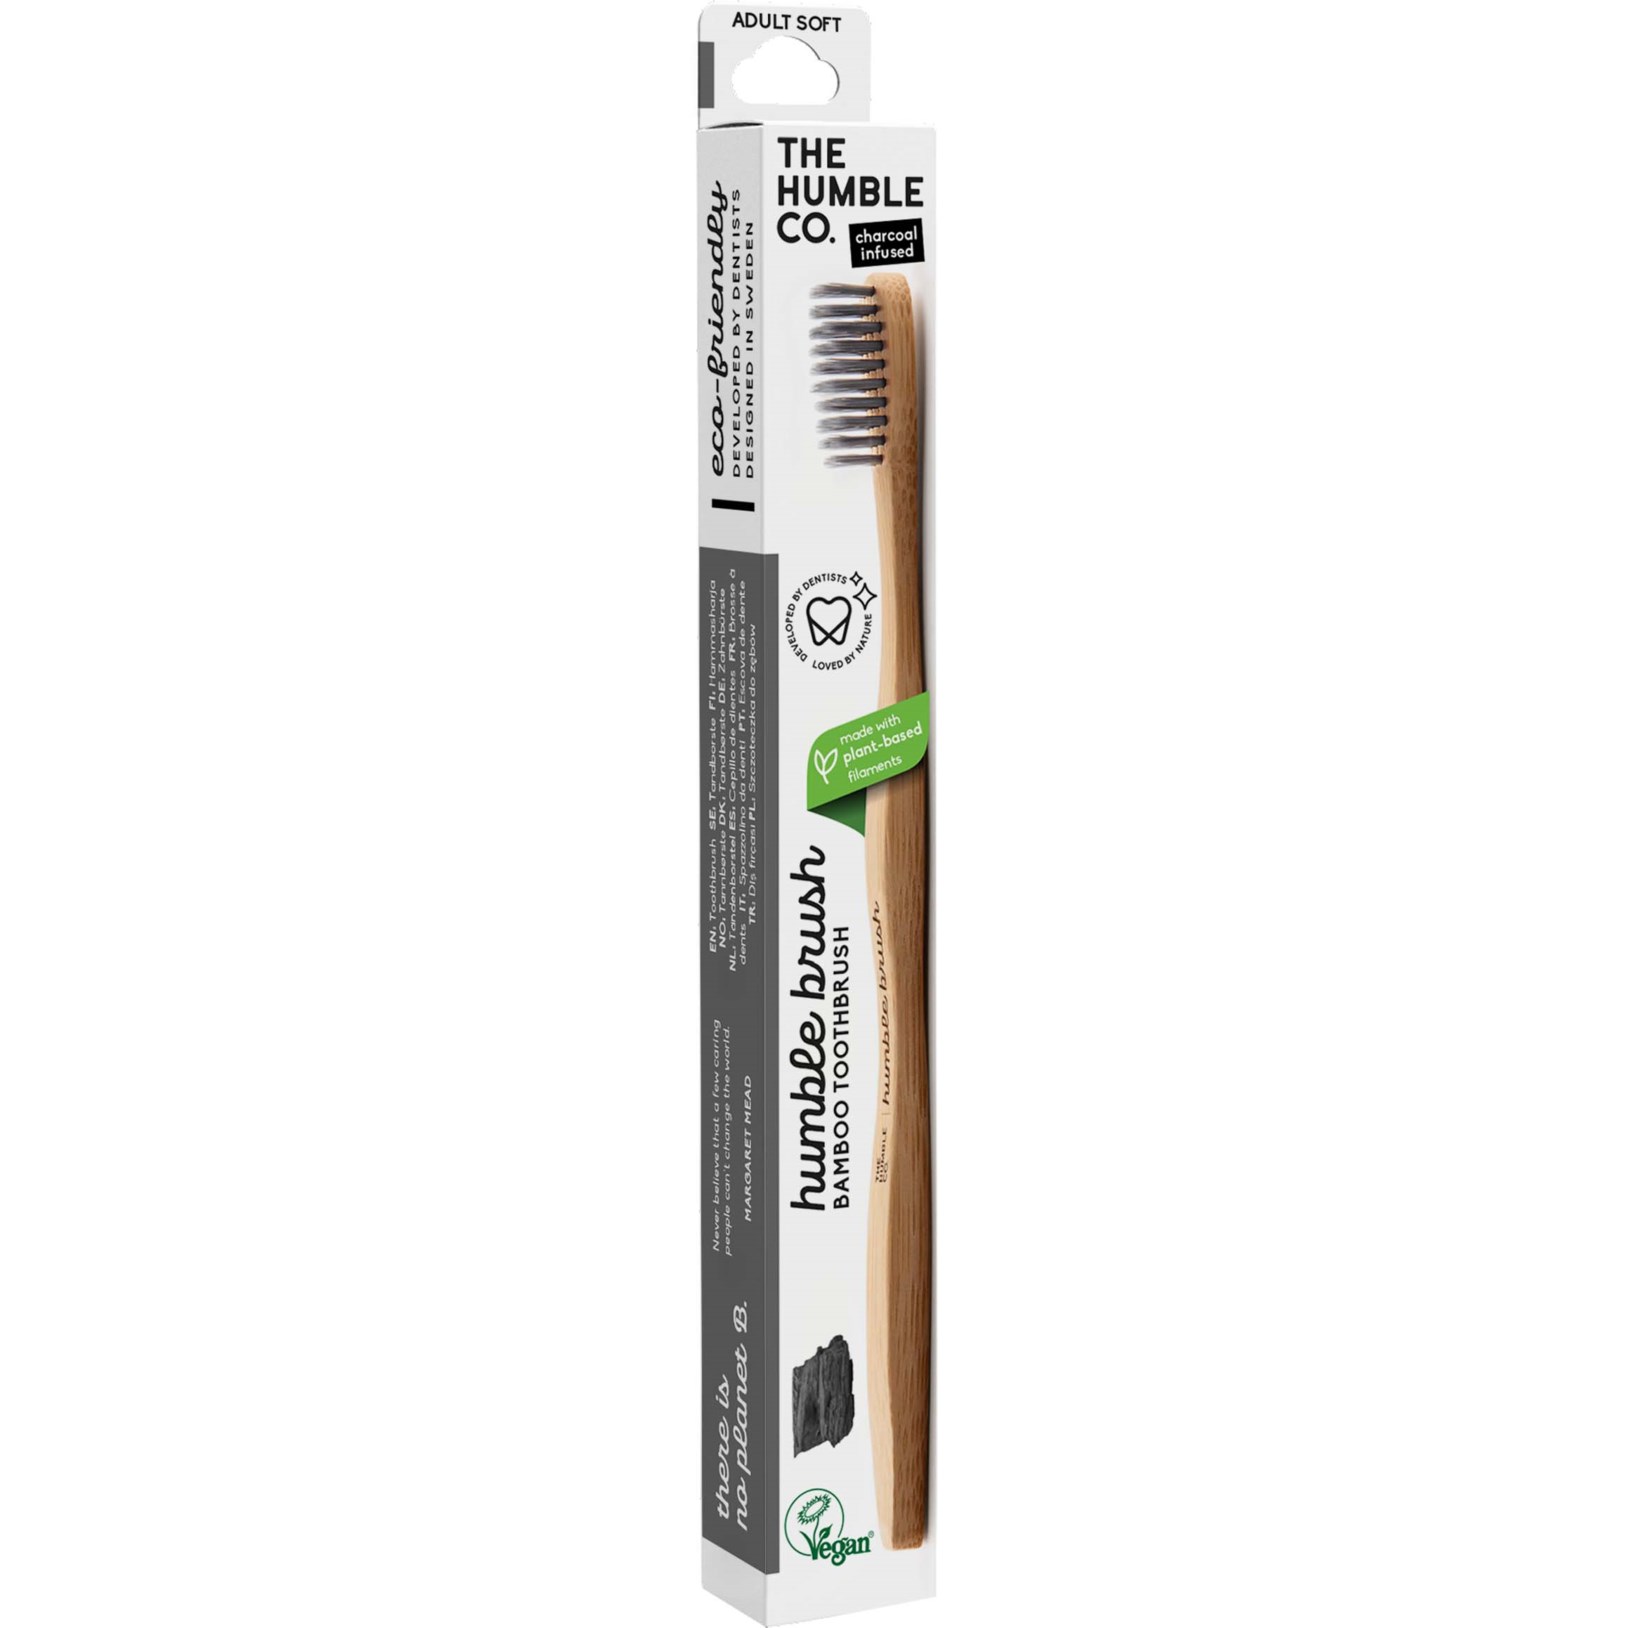 The Humble Co. Charcoal Bristles 20 g